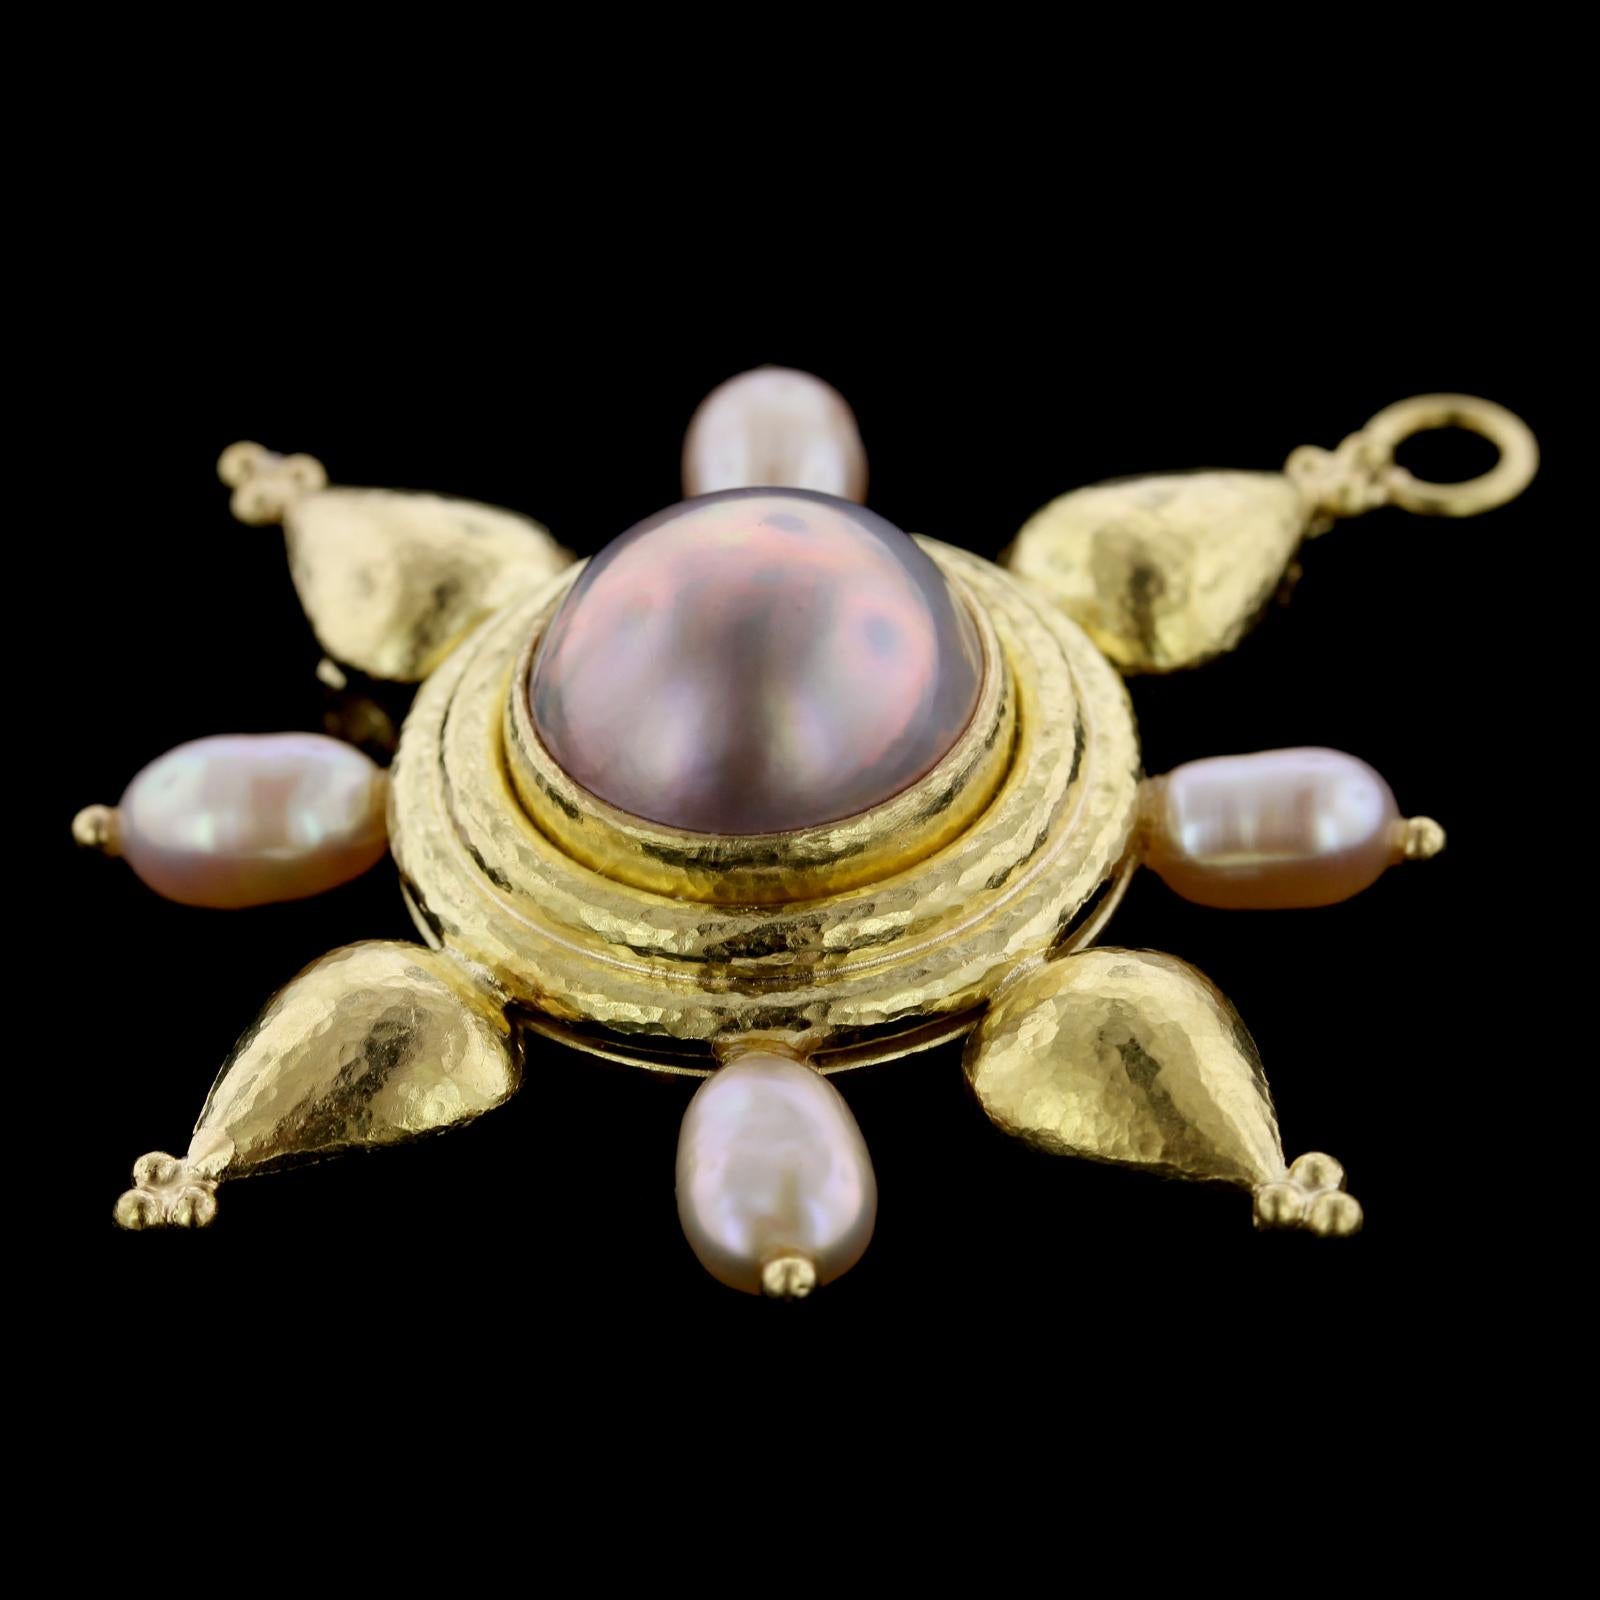 Elizabeth Locke 18K Yellow Gold Pink Mabe Pearl and Freshwater Pearl Pendant Brooch. The pendant is bezel set with a mabe pearl measuring 15.50mm., framed by four freshwater pearls, diameter 2 1/4